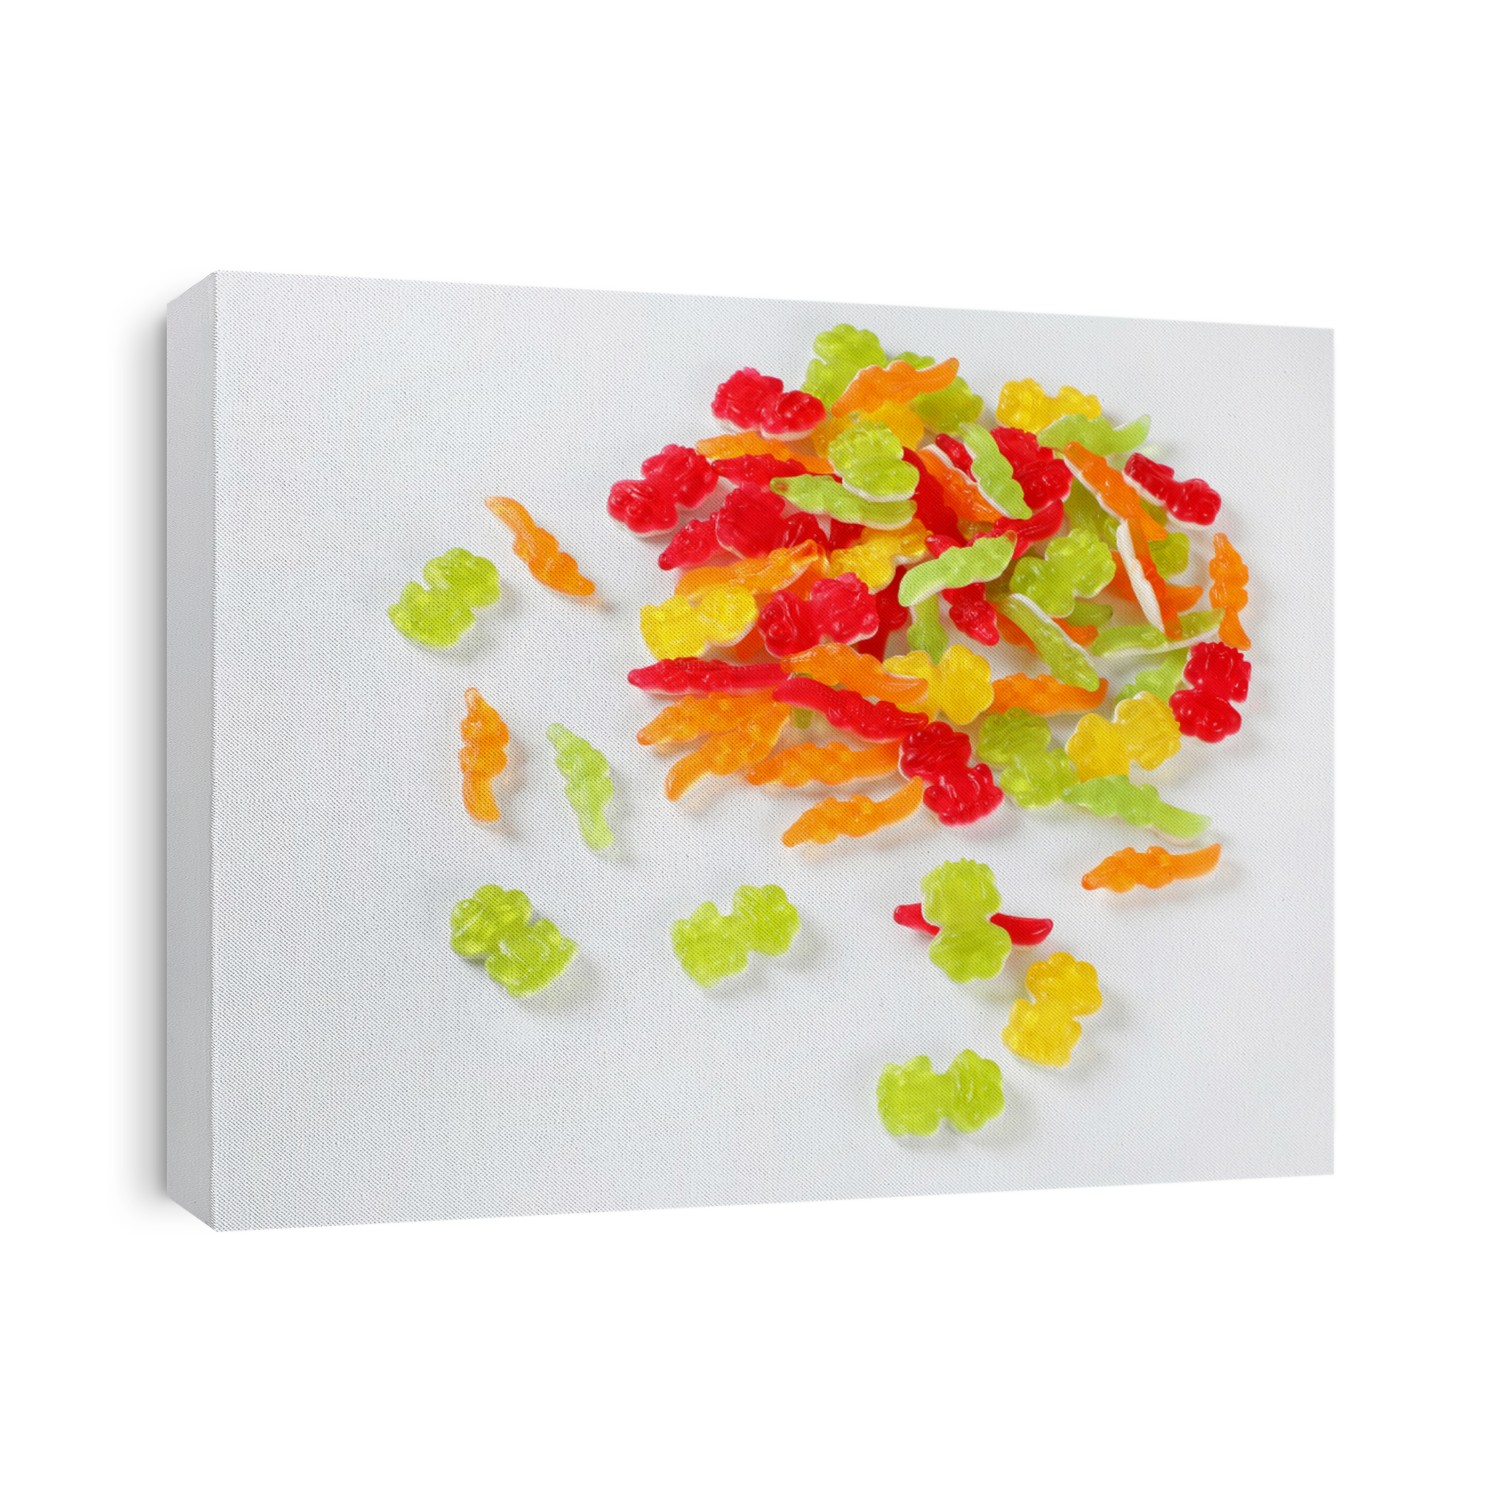 pile of colorful gummy candies in the shape of animals on white background